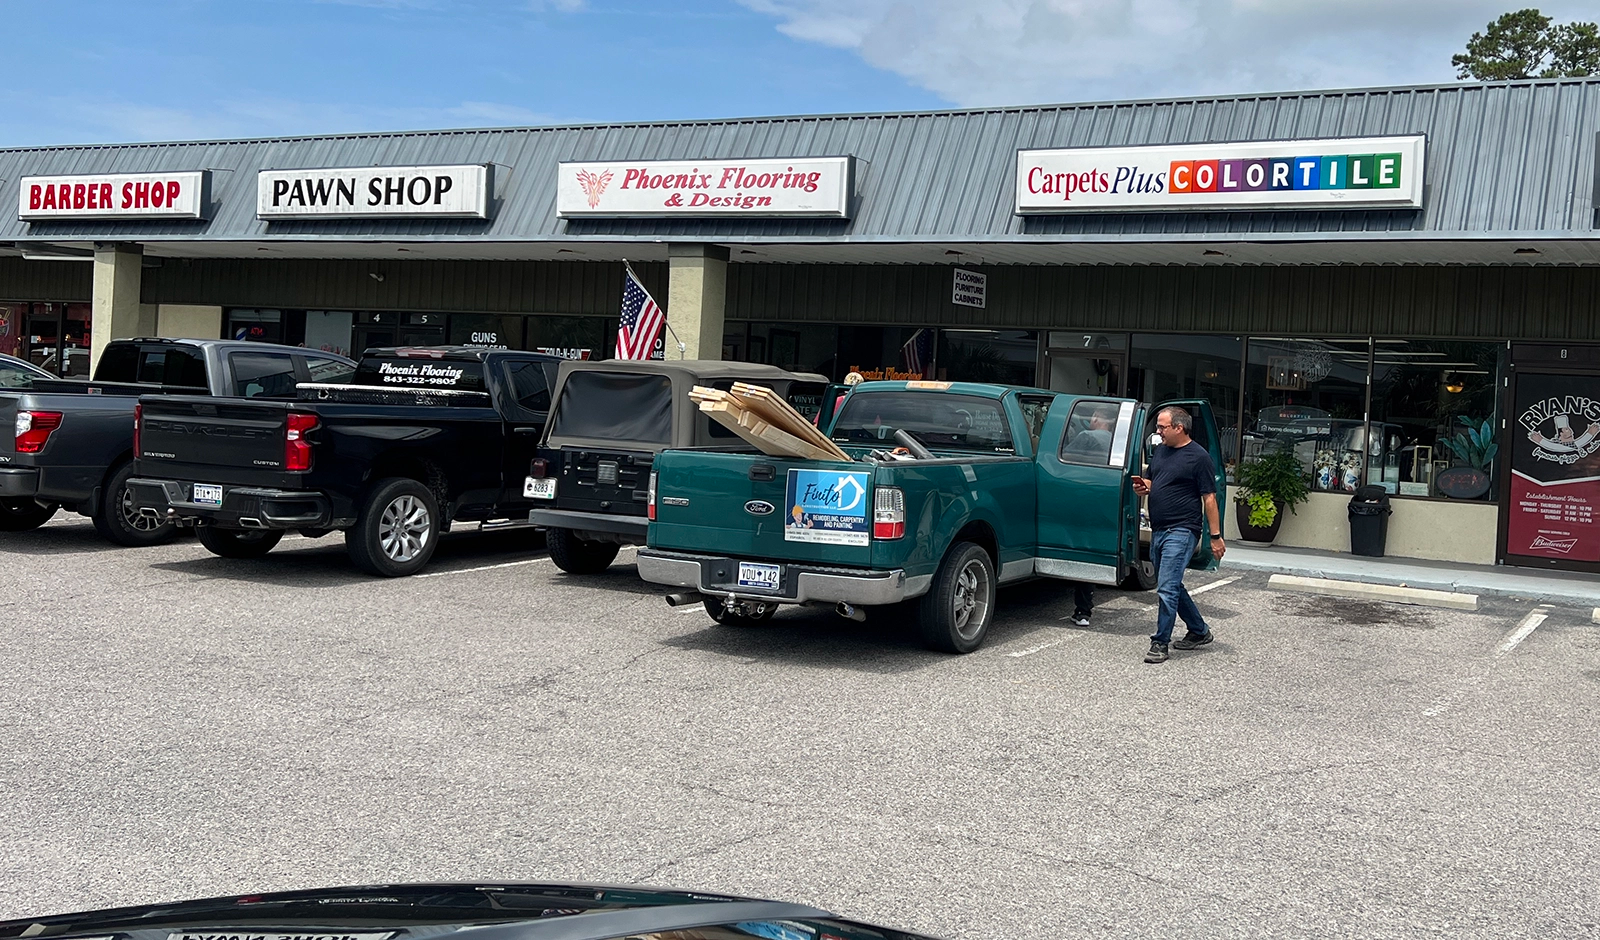 A green truck is parked in front of a store.